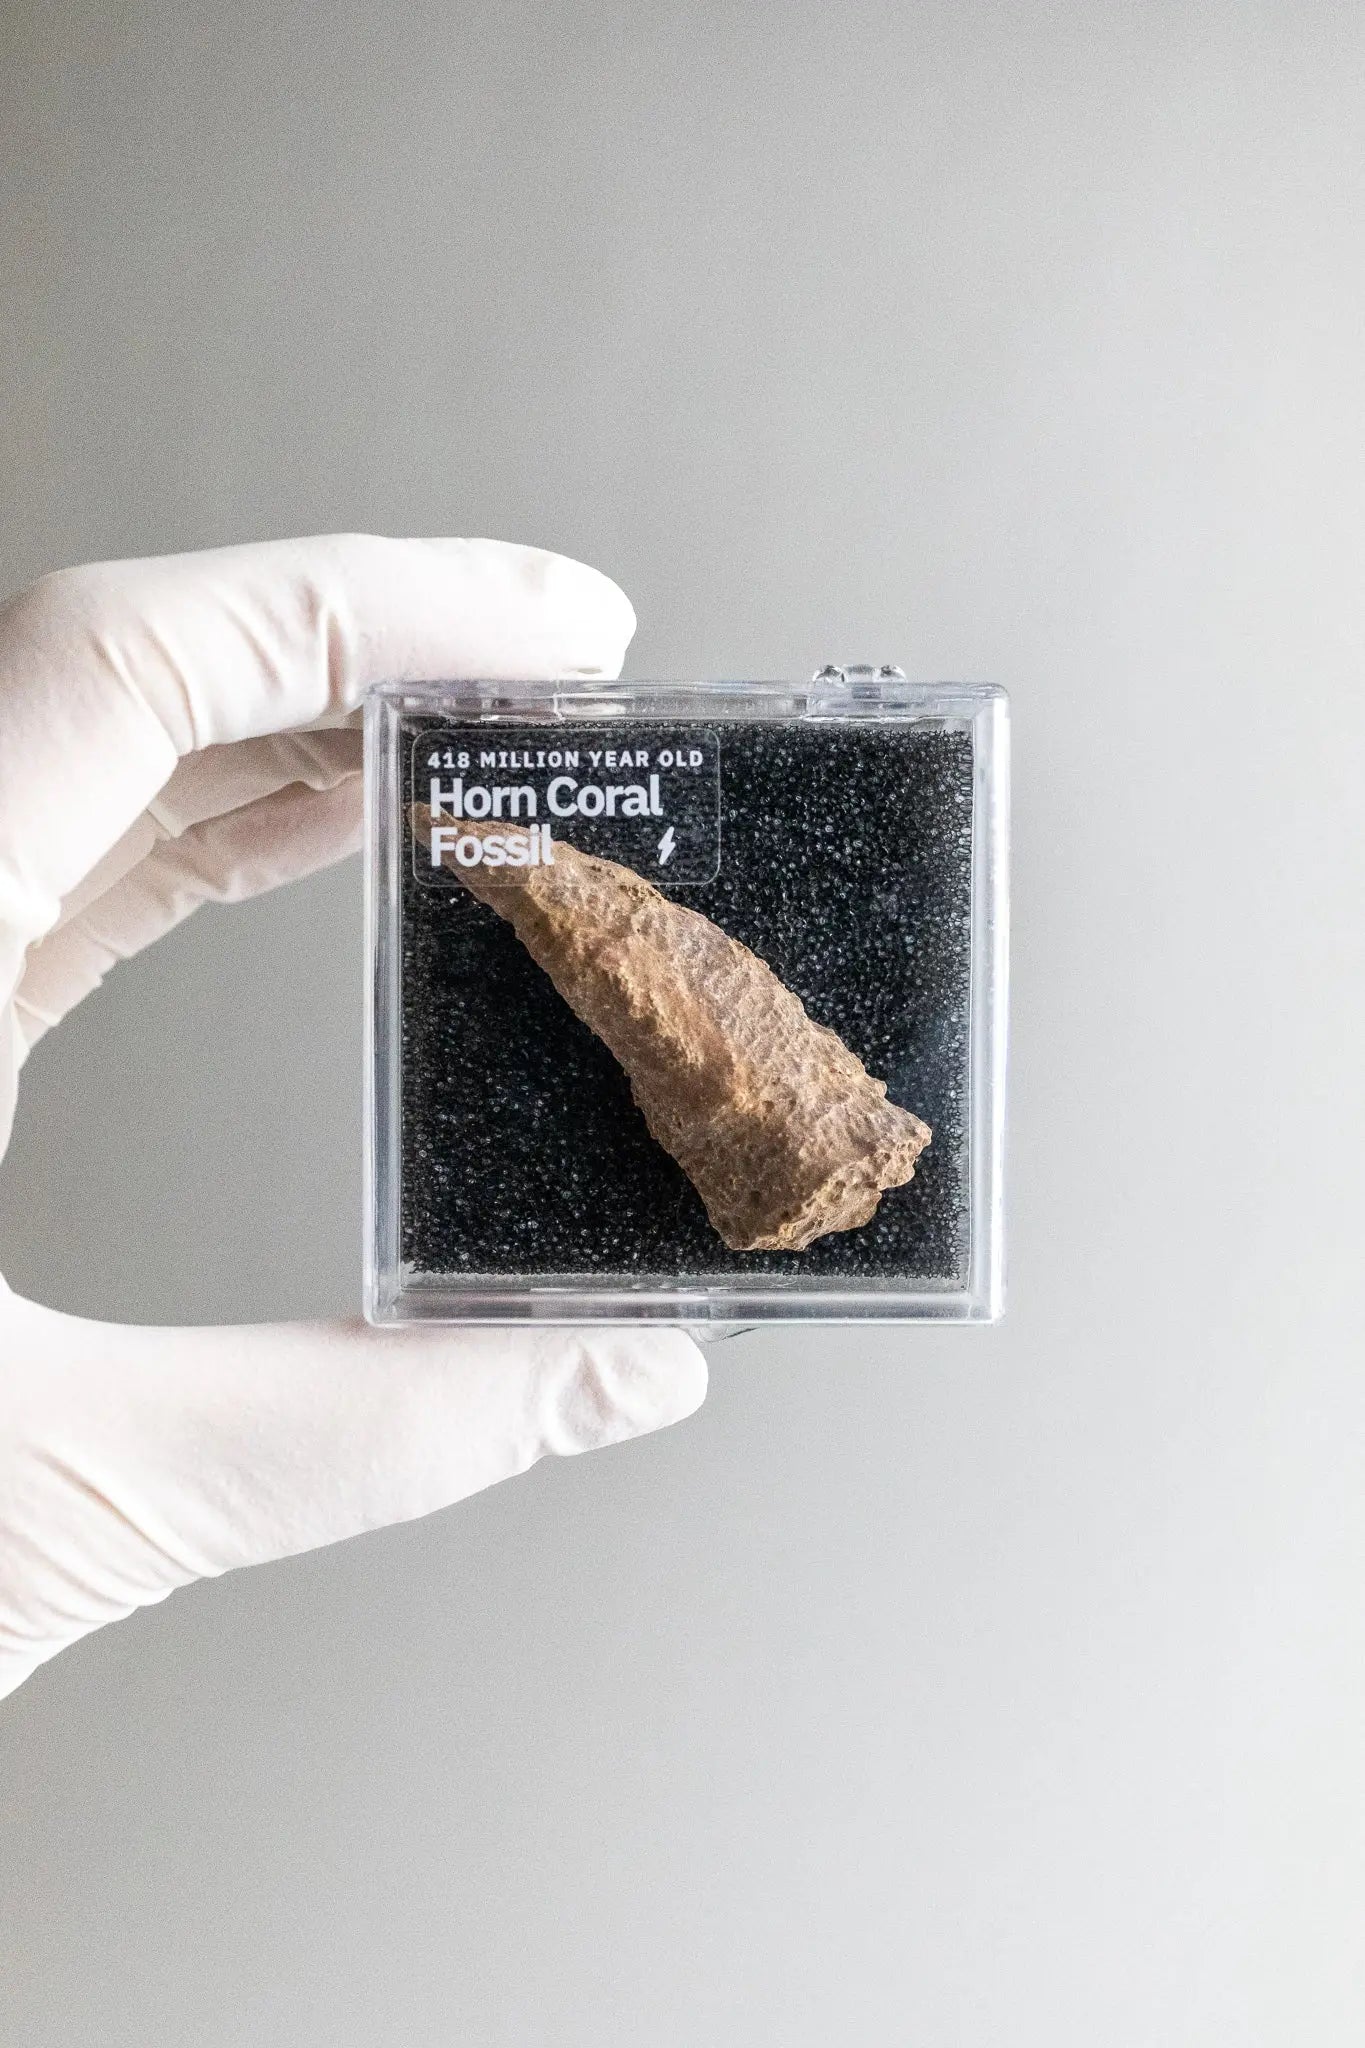 Horn Coral Fossil - Stemcell Science Shop